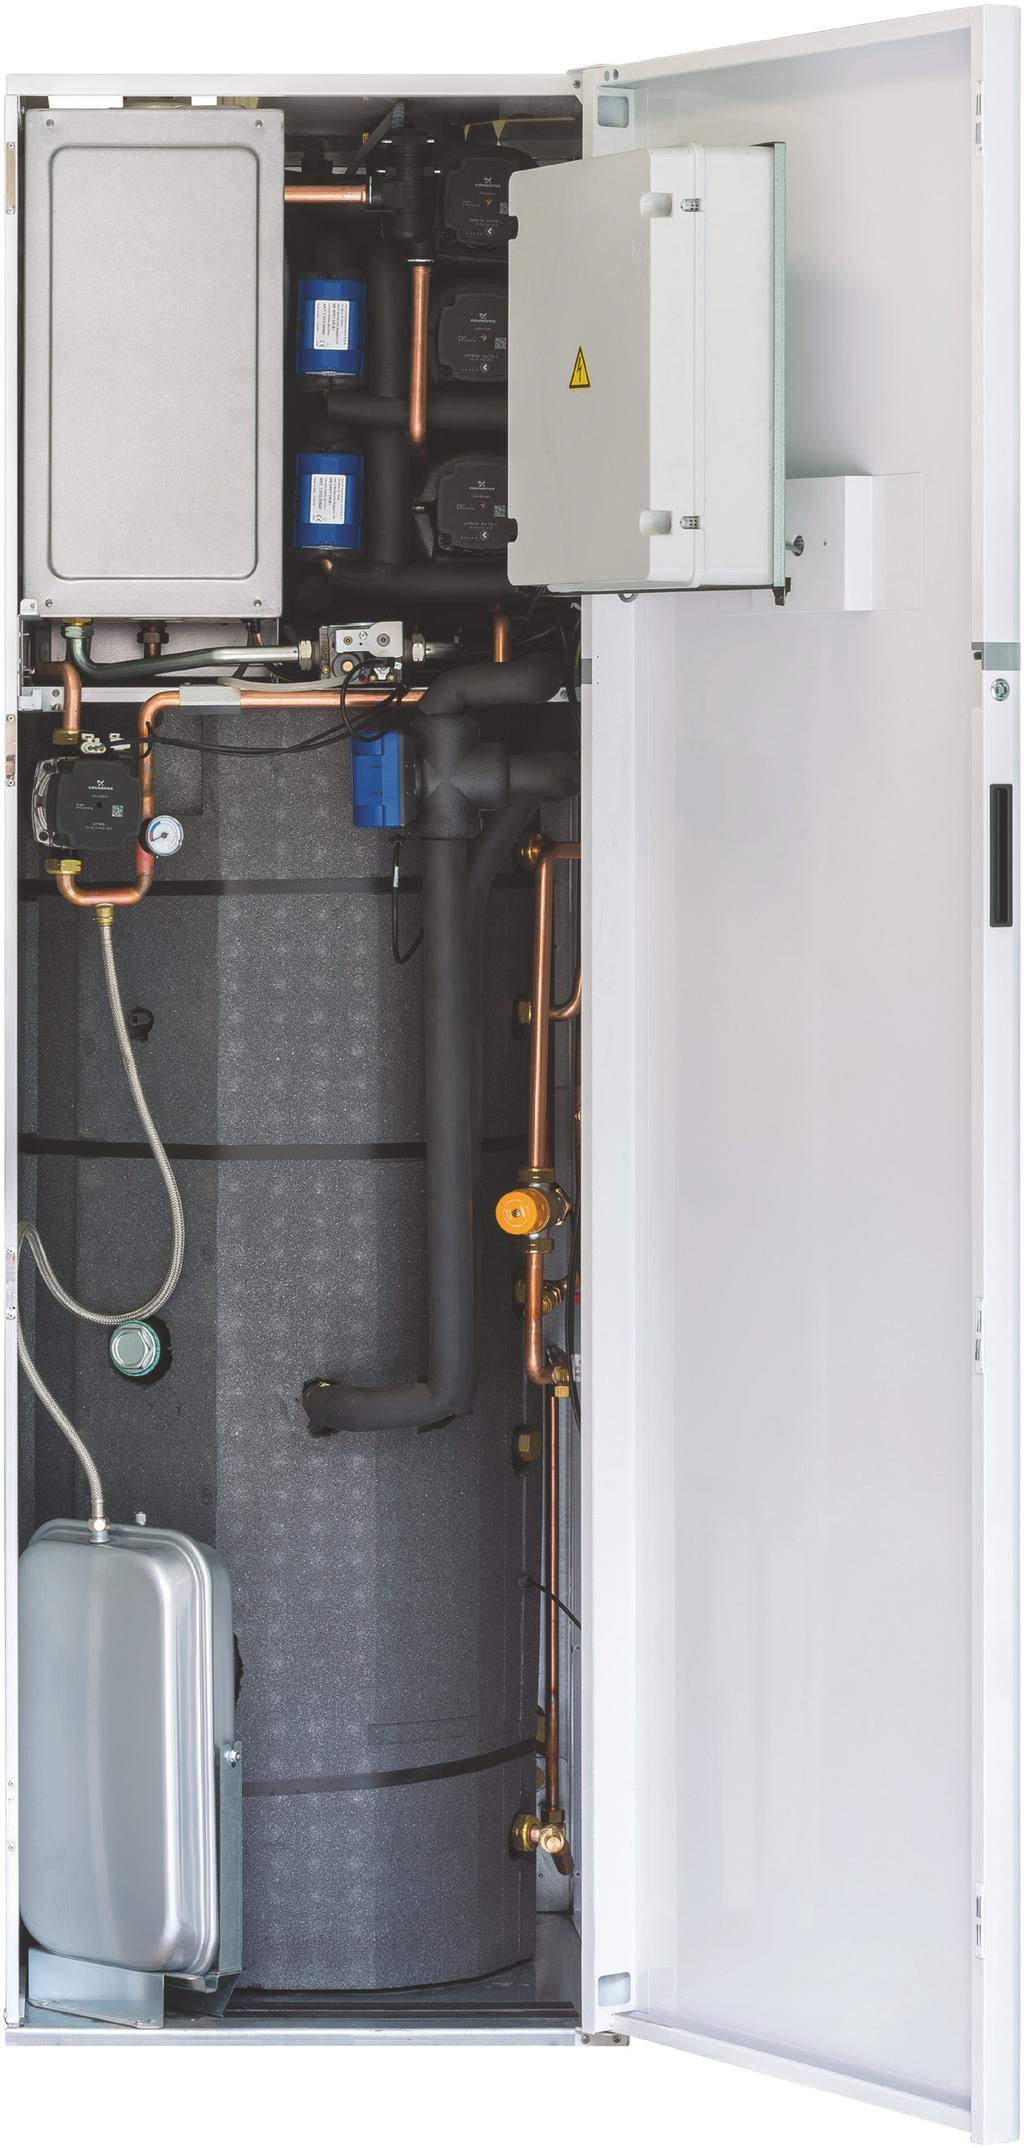 TOWER GREEN HE HYBRID / Condensing Floor-standing Boilers TECHNOLOGY AND ADVANTAGES Possibility of cooling if connected with the heat pump Hydronic Unit LE B Hinged door to simplify access Front